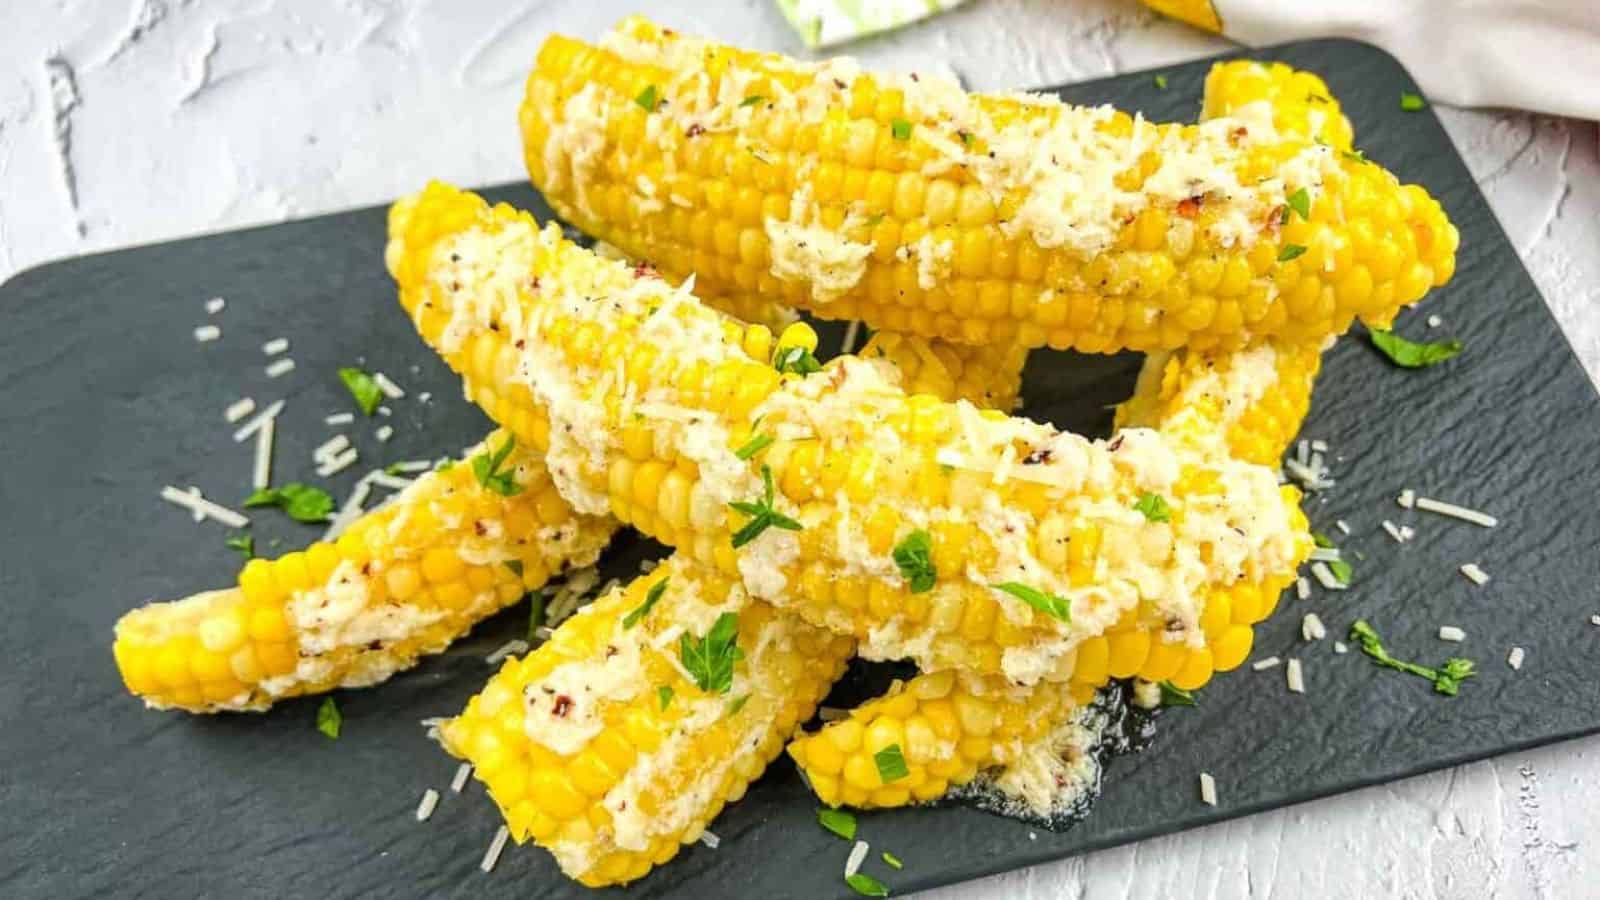 Corn on the cob with garlic parmesan on a black plate.